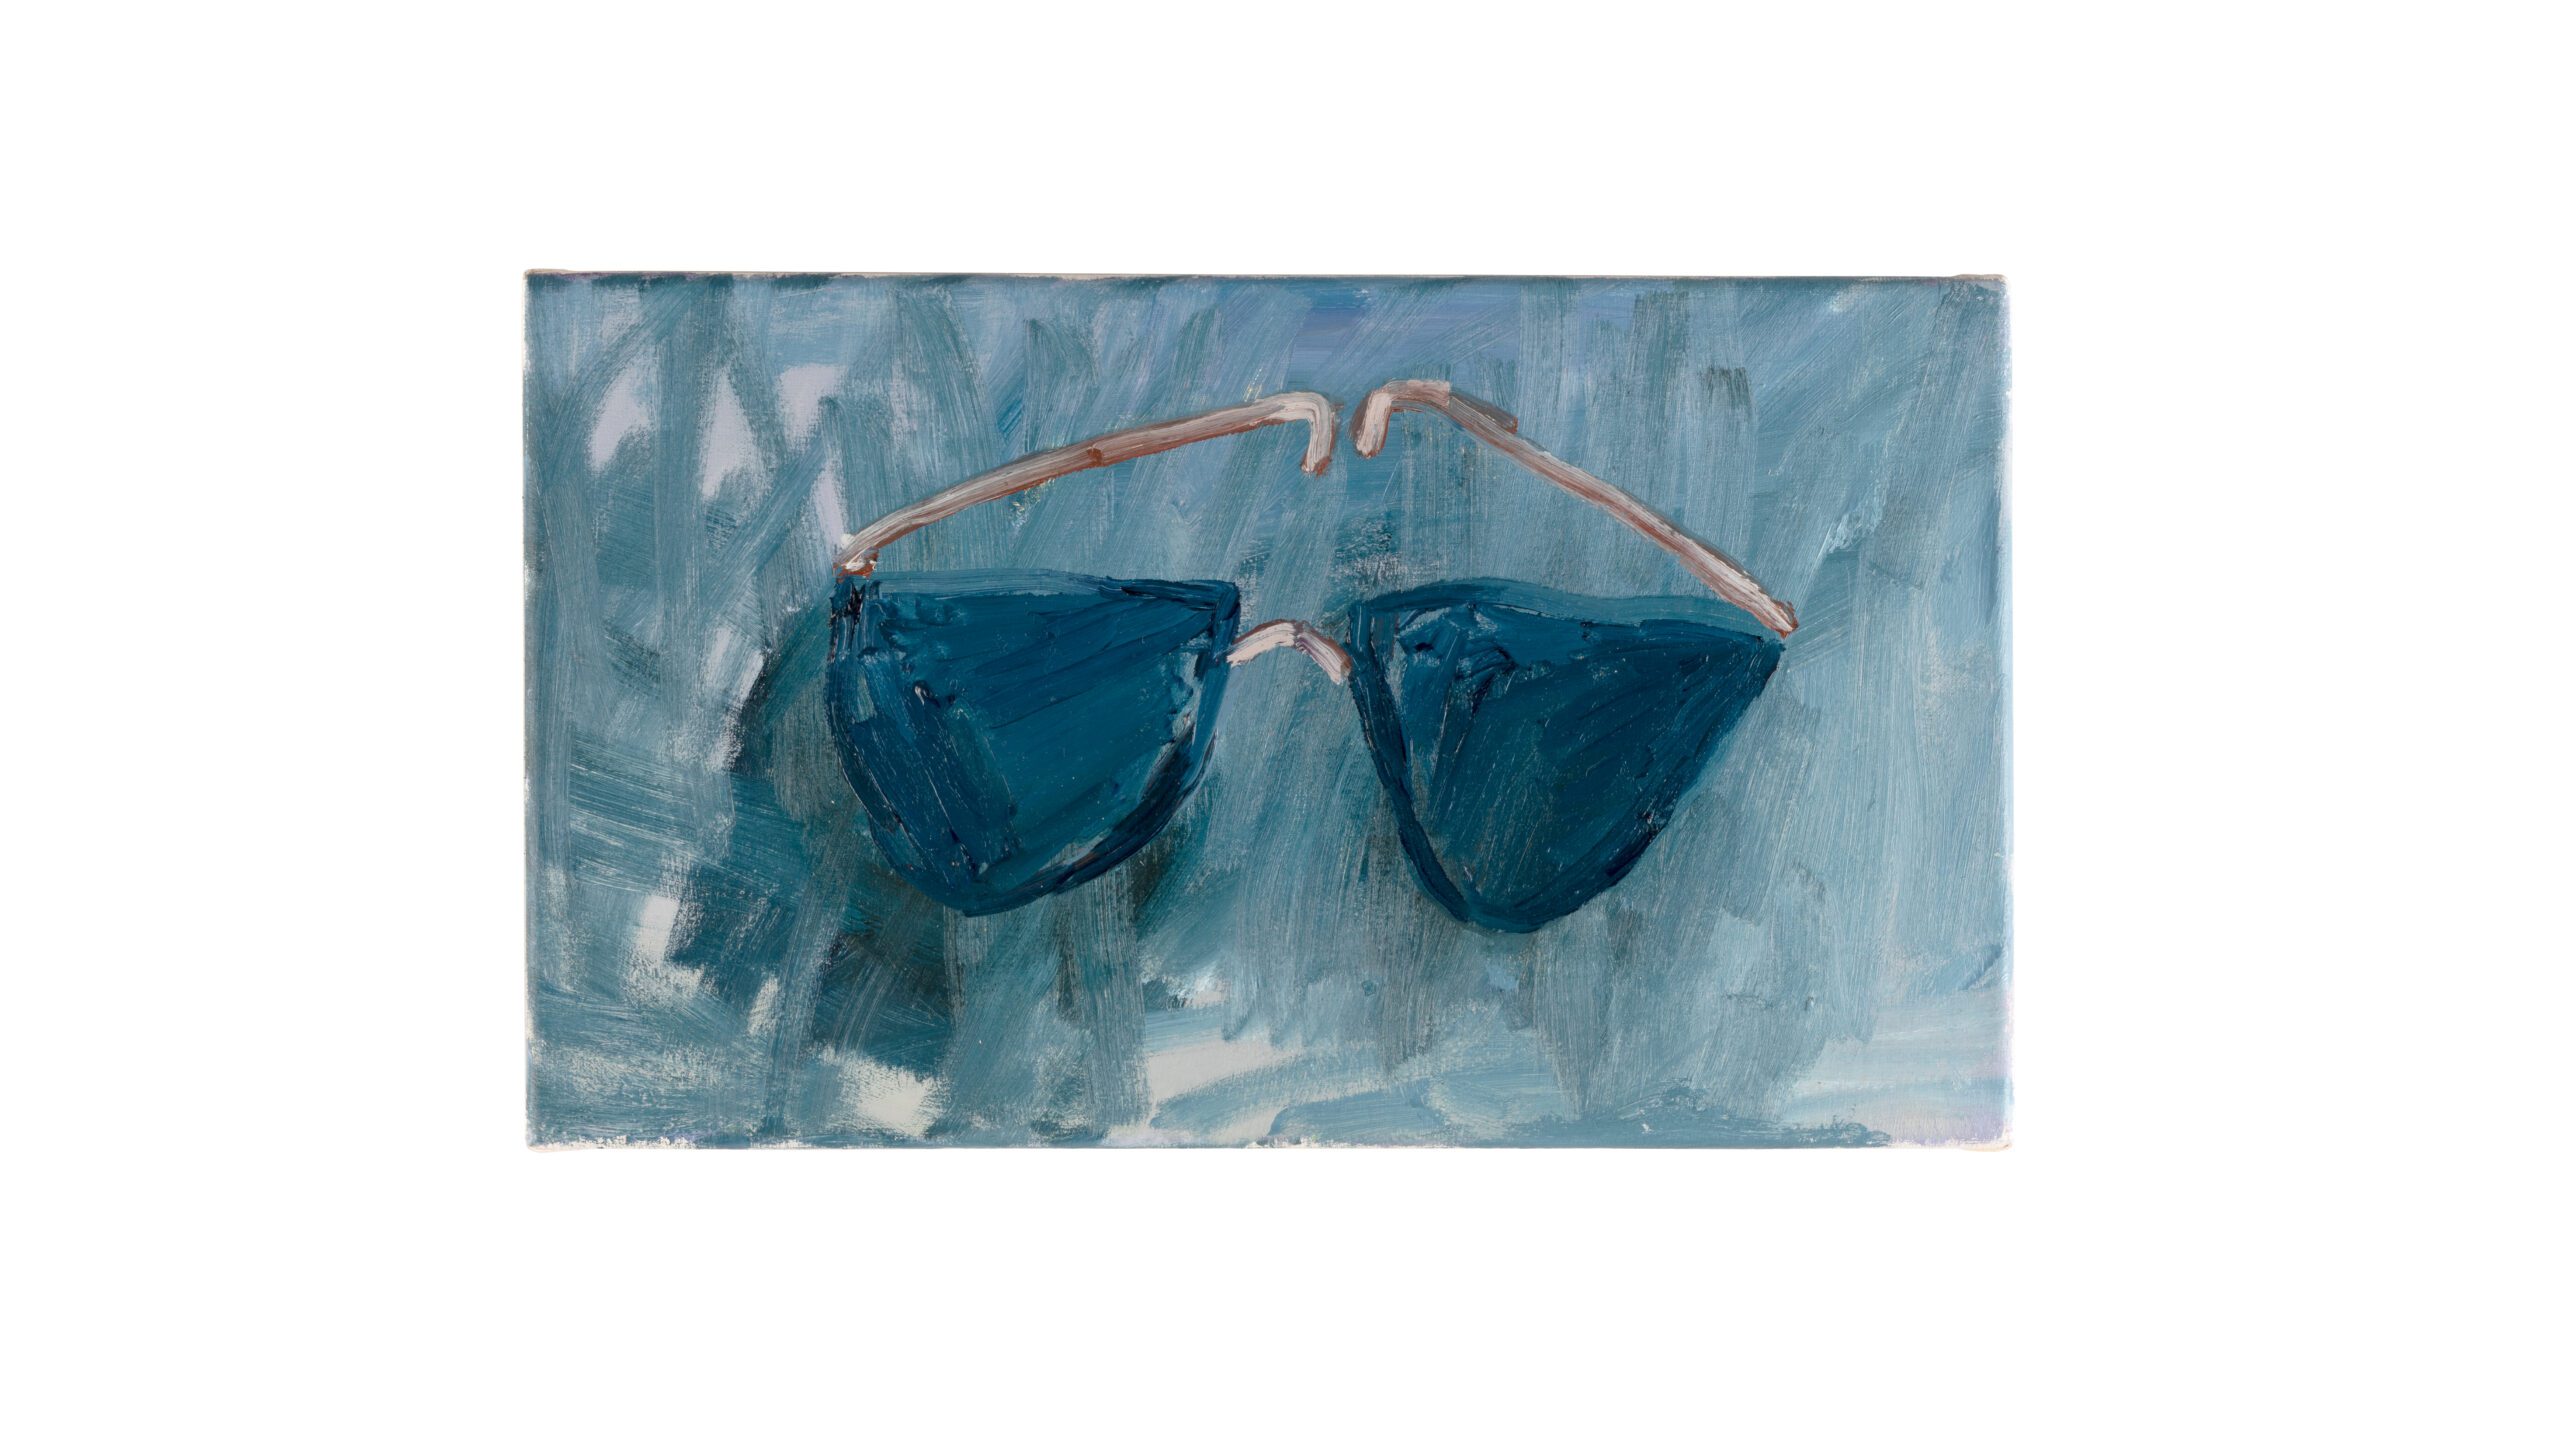 Sunglasses oil painting by Stefanie Winter